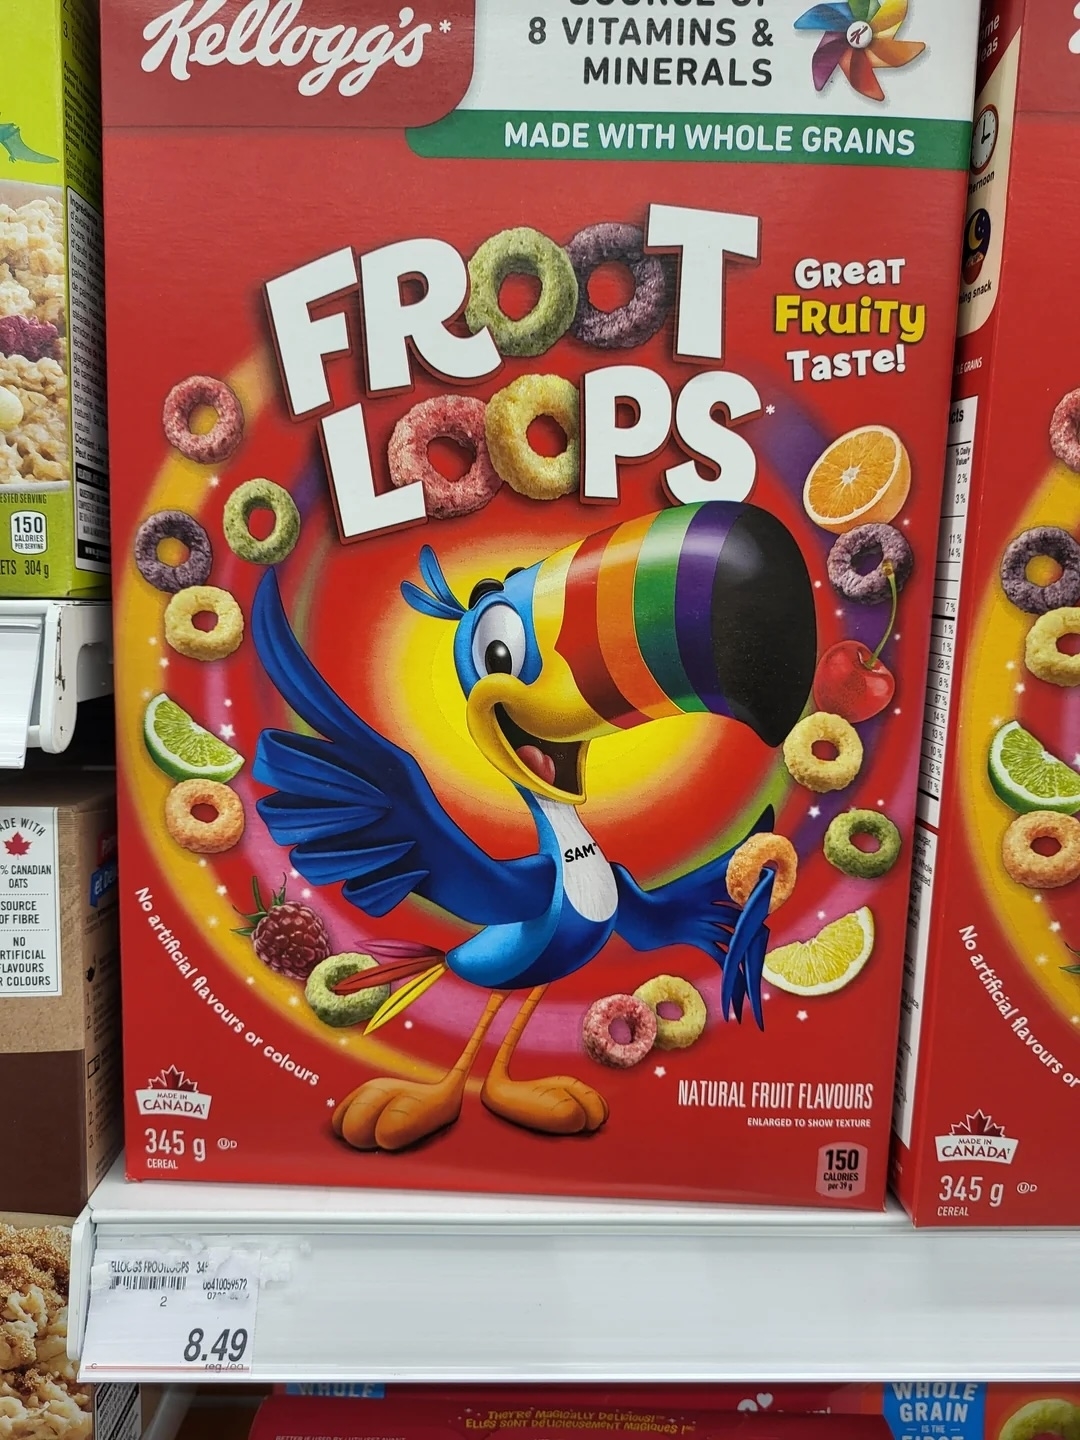 Toucan Sam on Froot Loops box with cereal pieces and fruits around; one box has a price of $8.49.